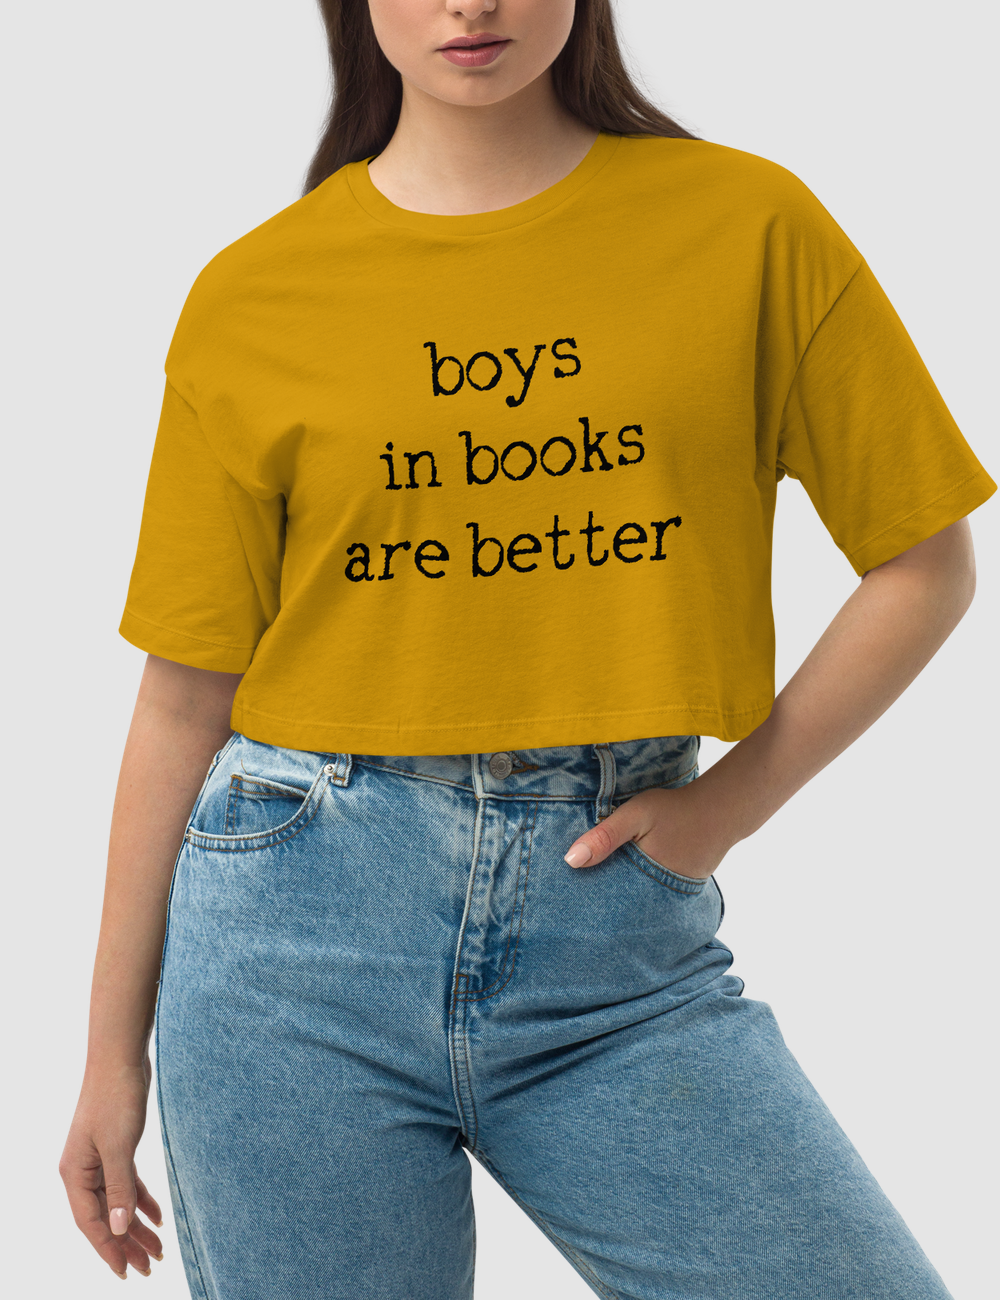 Boys In Books Are Better | Women's Loose Fit Crop Top T-Shirt OniTakai